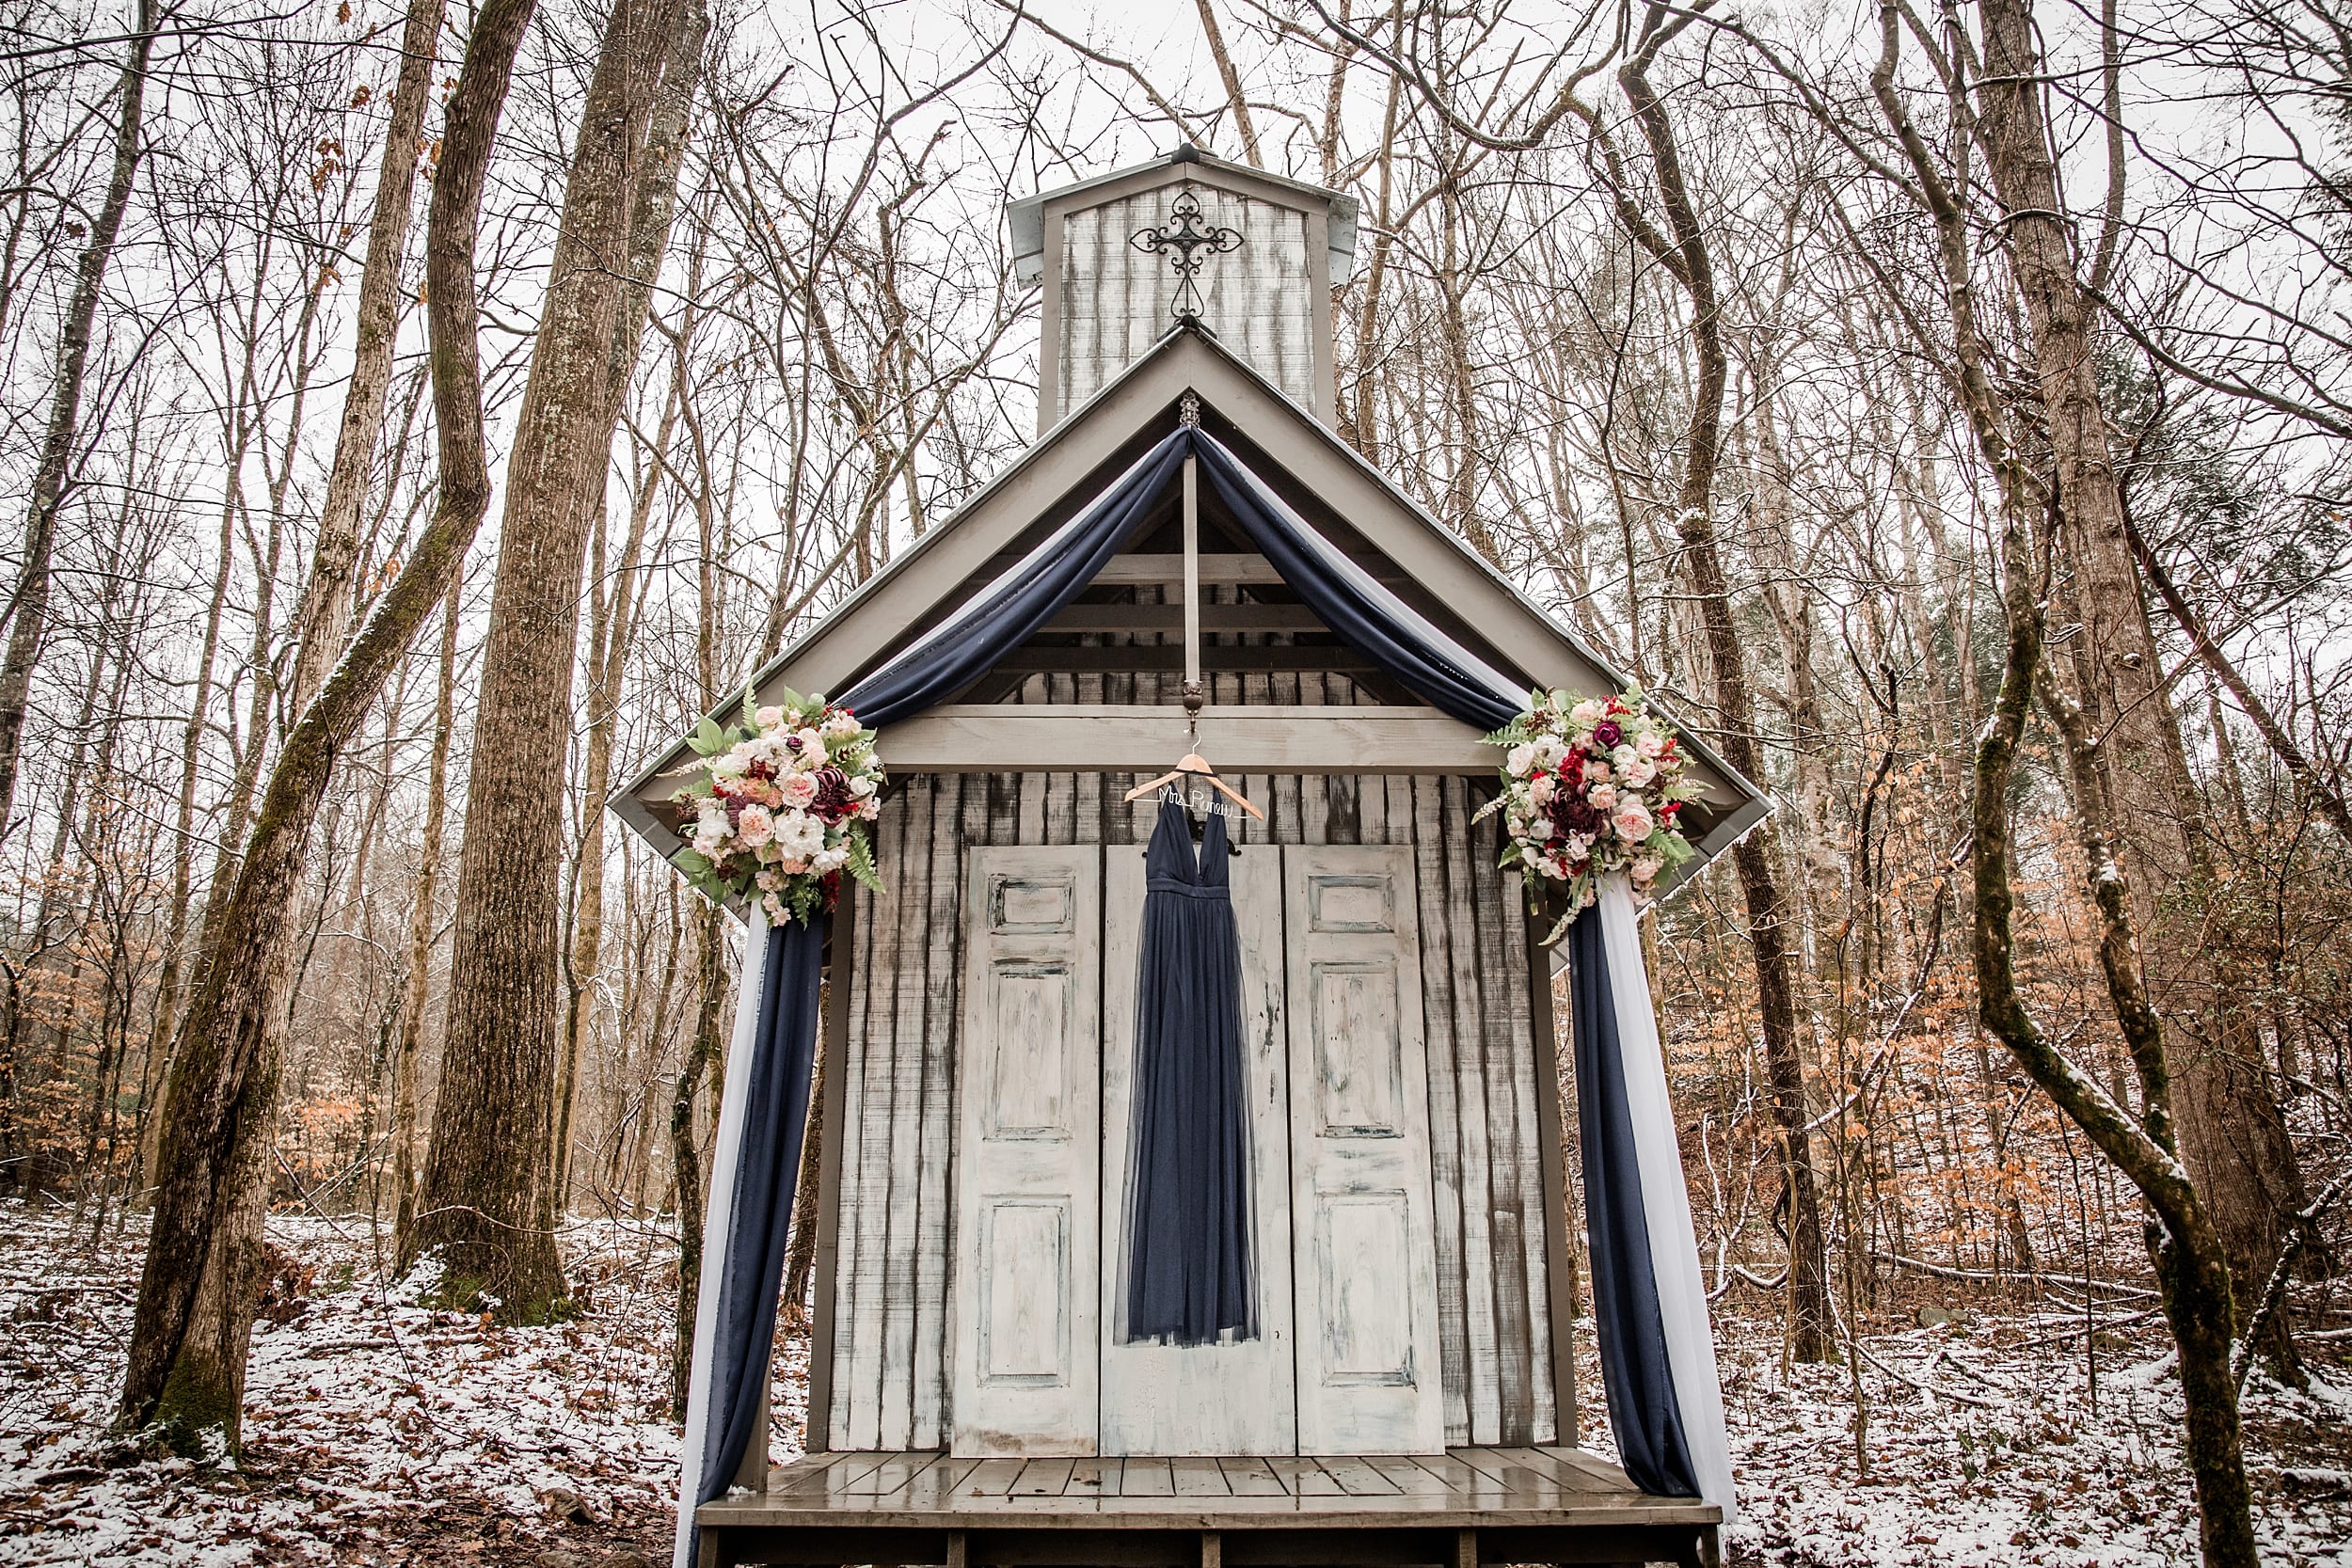 Smoky Mountain Vow Renewals Mini Chapel in the Woods